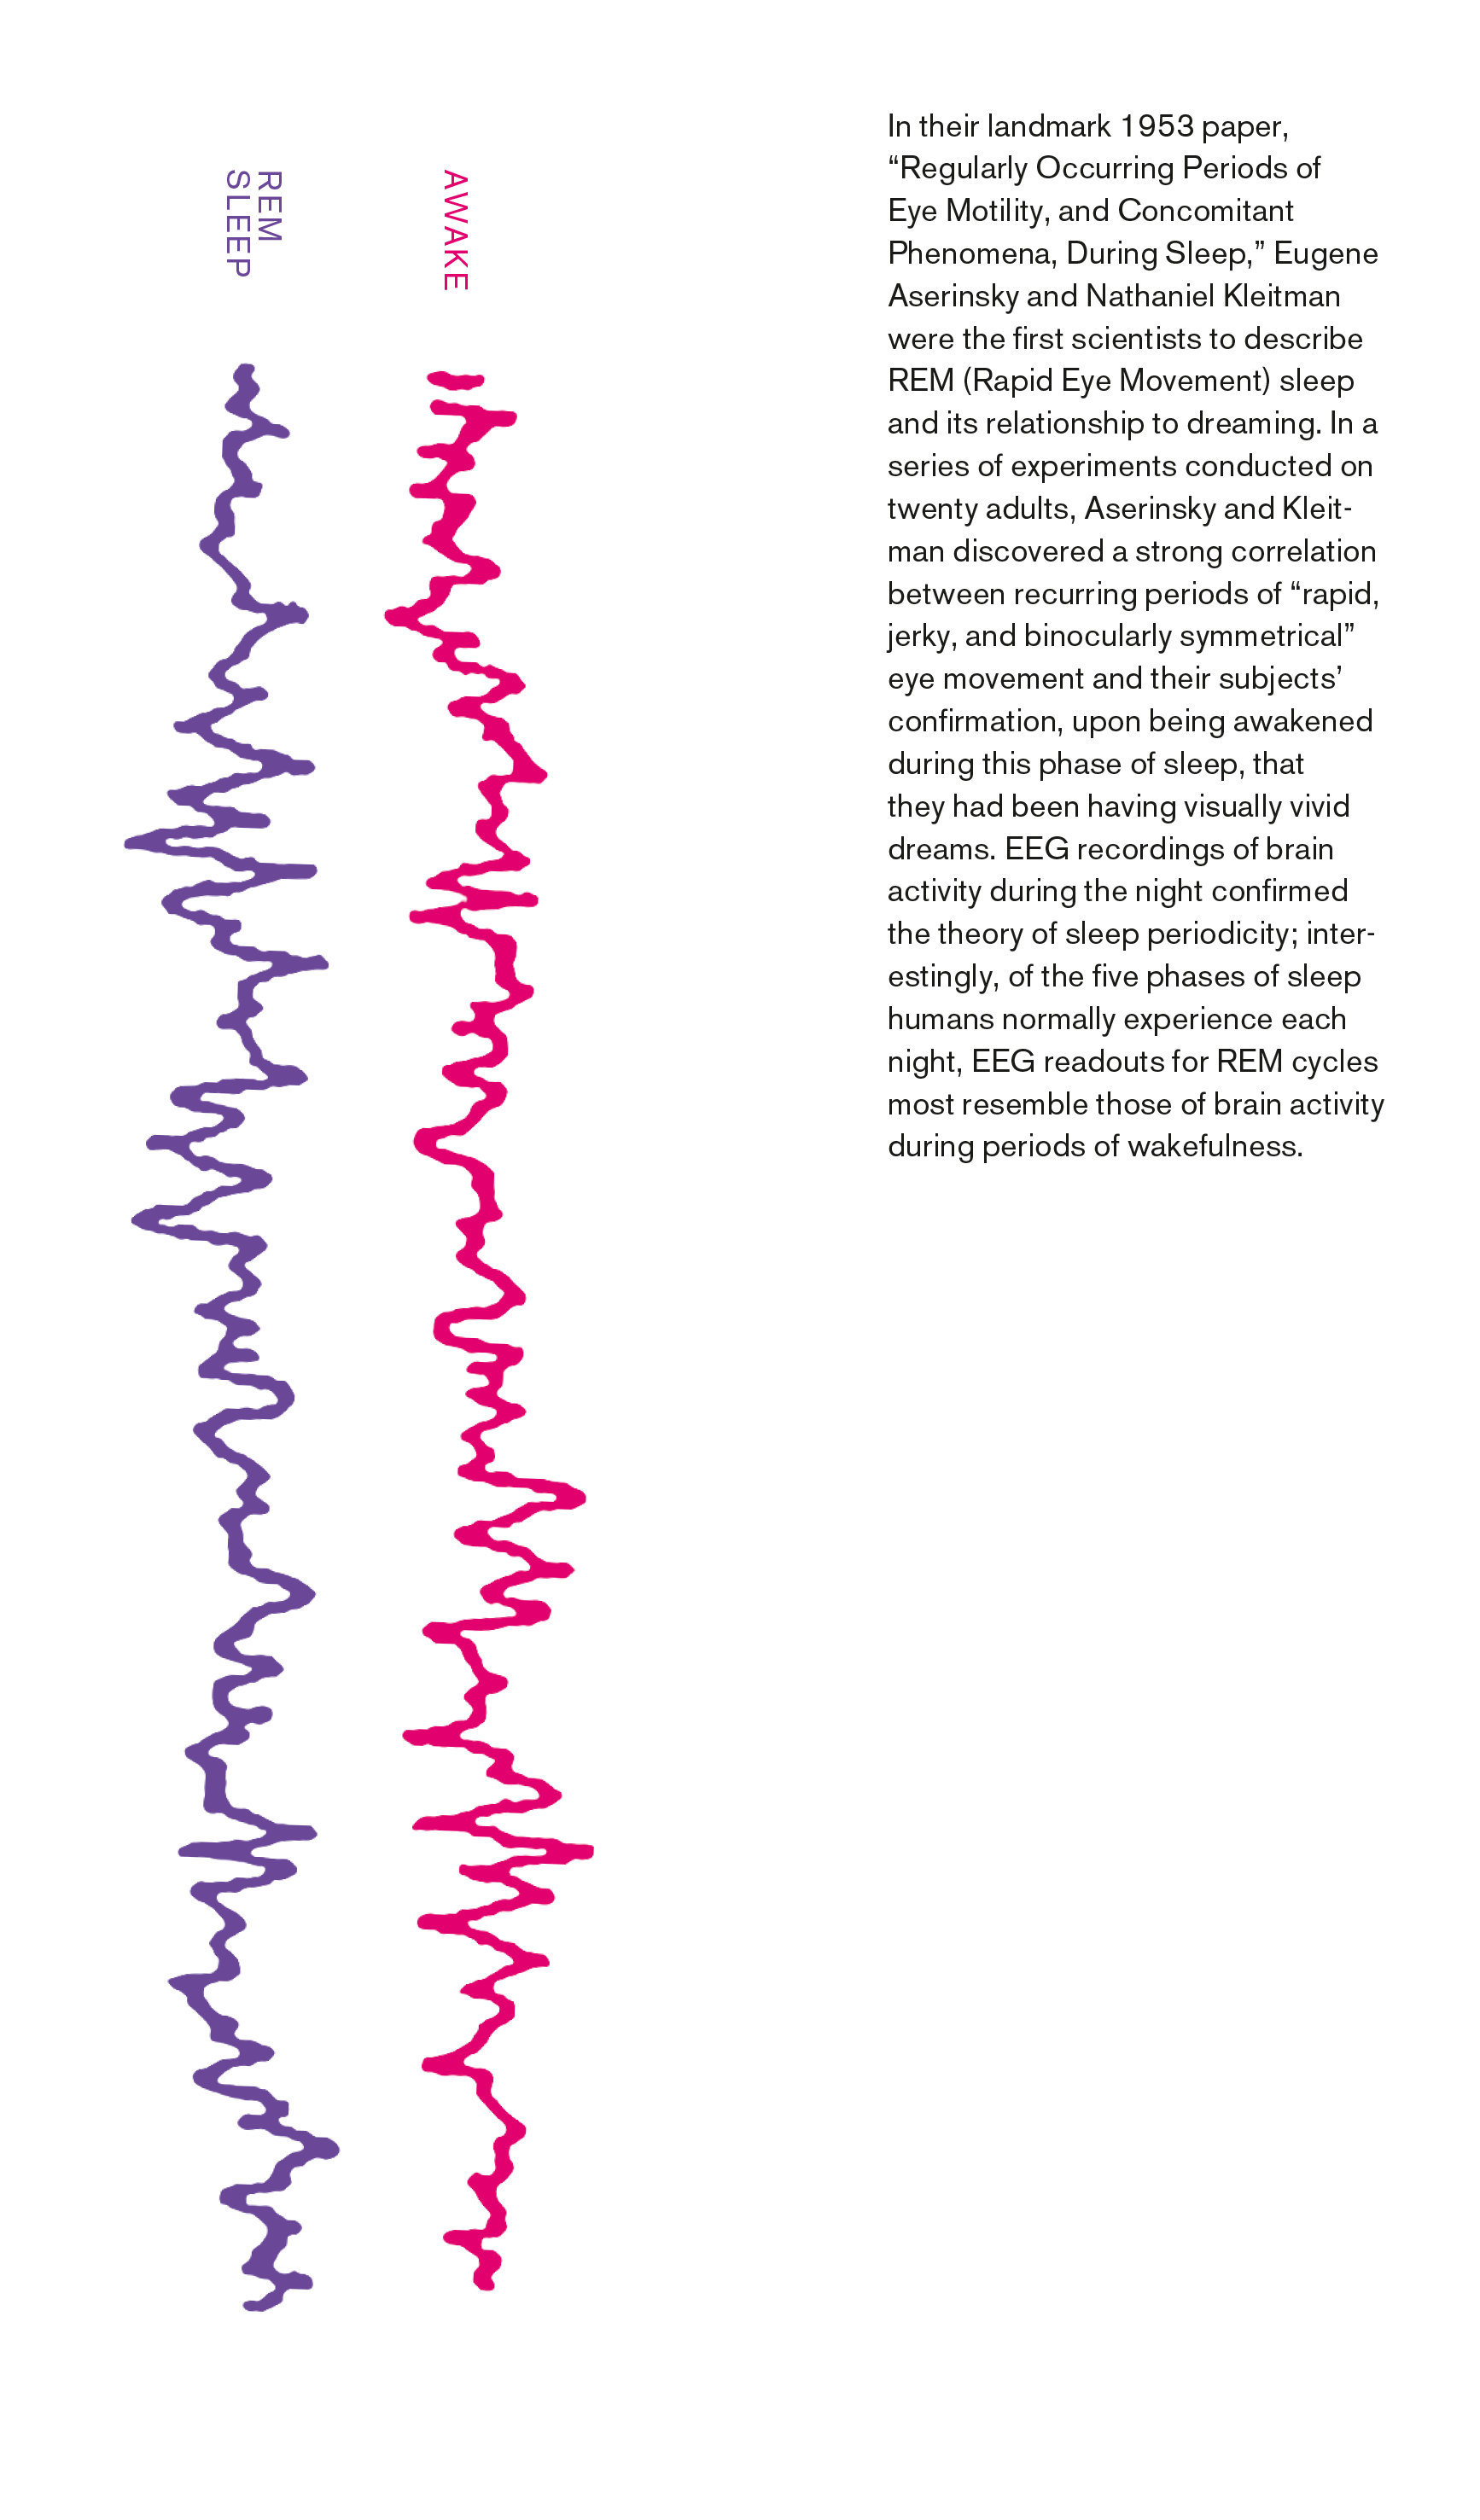 A bookmark depicting two EEG recordings of brain activity, one when awake, one in REM sleep, alongside the caption “NO RESPITE EVEN WHEN ASLEEP.” The back of the bookmark reads “In their landmark 1953 paper, “Regularly Occurring Periods of Eye Motility, and Concomitant Phenomena, During Sleep,” Eugene Aserinsky and Nathaniel Kleitman were the first scientists to describe REM (Rapid Eye Movement) sleep and its relationship to dreaming. In a series of experiments conducted on twenty adults, Aserinsky and Kleit- man discovered a strong correlation between recurring periods of “rapid, jerky, and binocularly symmetrical” eye movement and their subjects’ confirmation, upon being awakened during this phase of sleep, that they had been having visually vivid dreams. EEG recordings of brain activity during the night confirmed the theory of sleep periodicity; interestingly, of the five phases of sleep humans normally experience each night, EEG readouts for REM cycles most resemble those of brain activity during periods of wakefulness.”